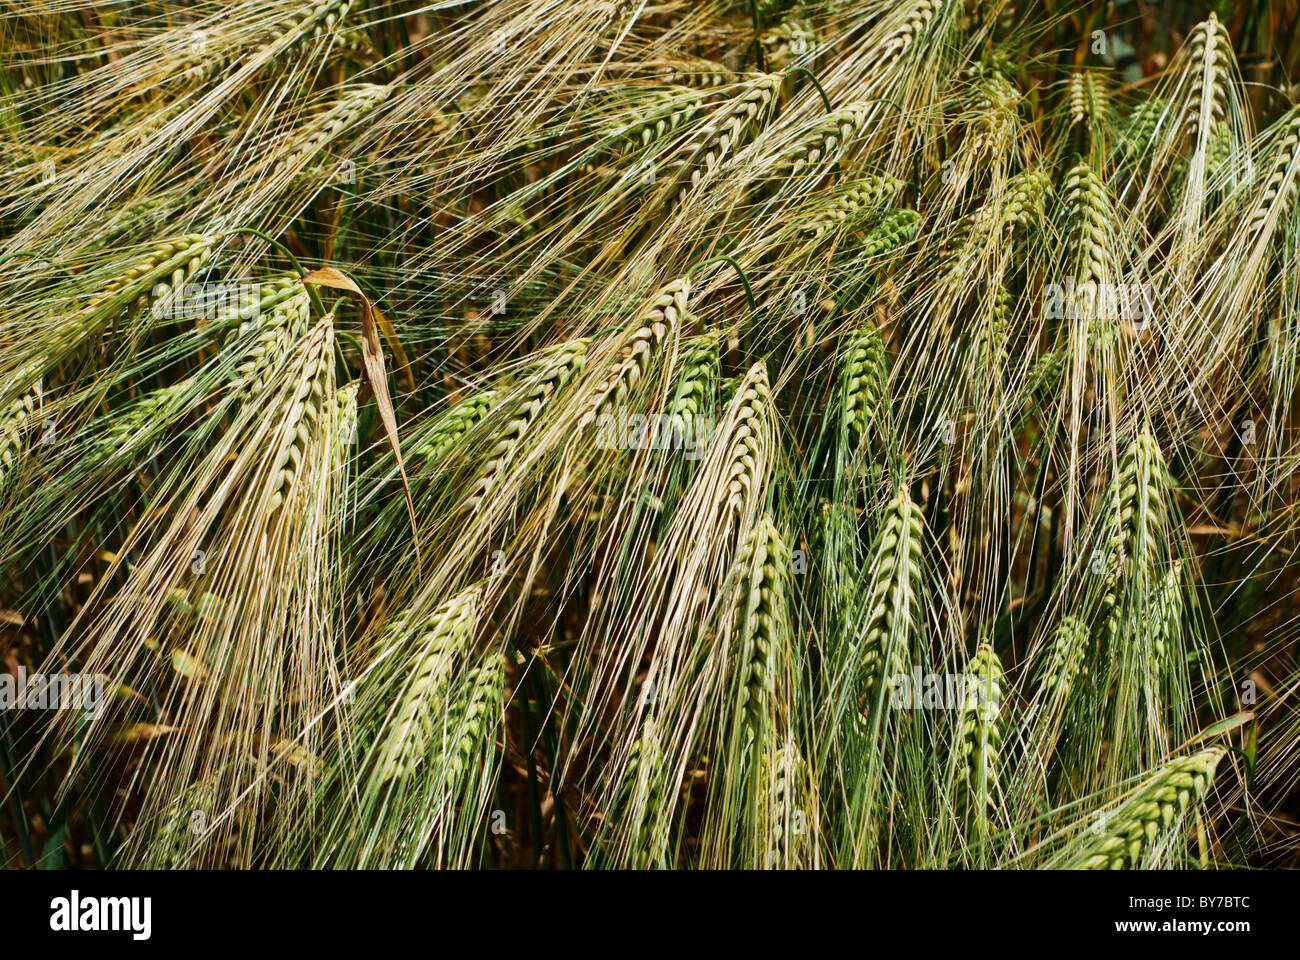 Group of green and golden barley heads Stock Photo